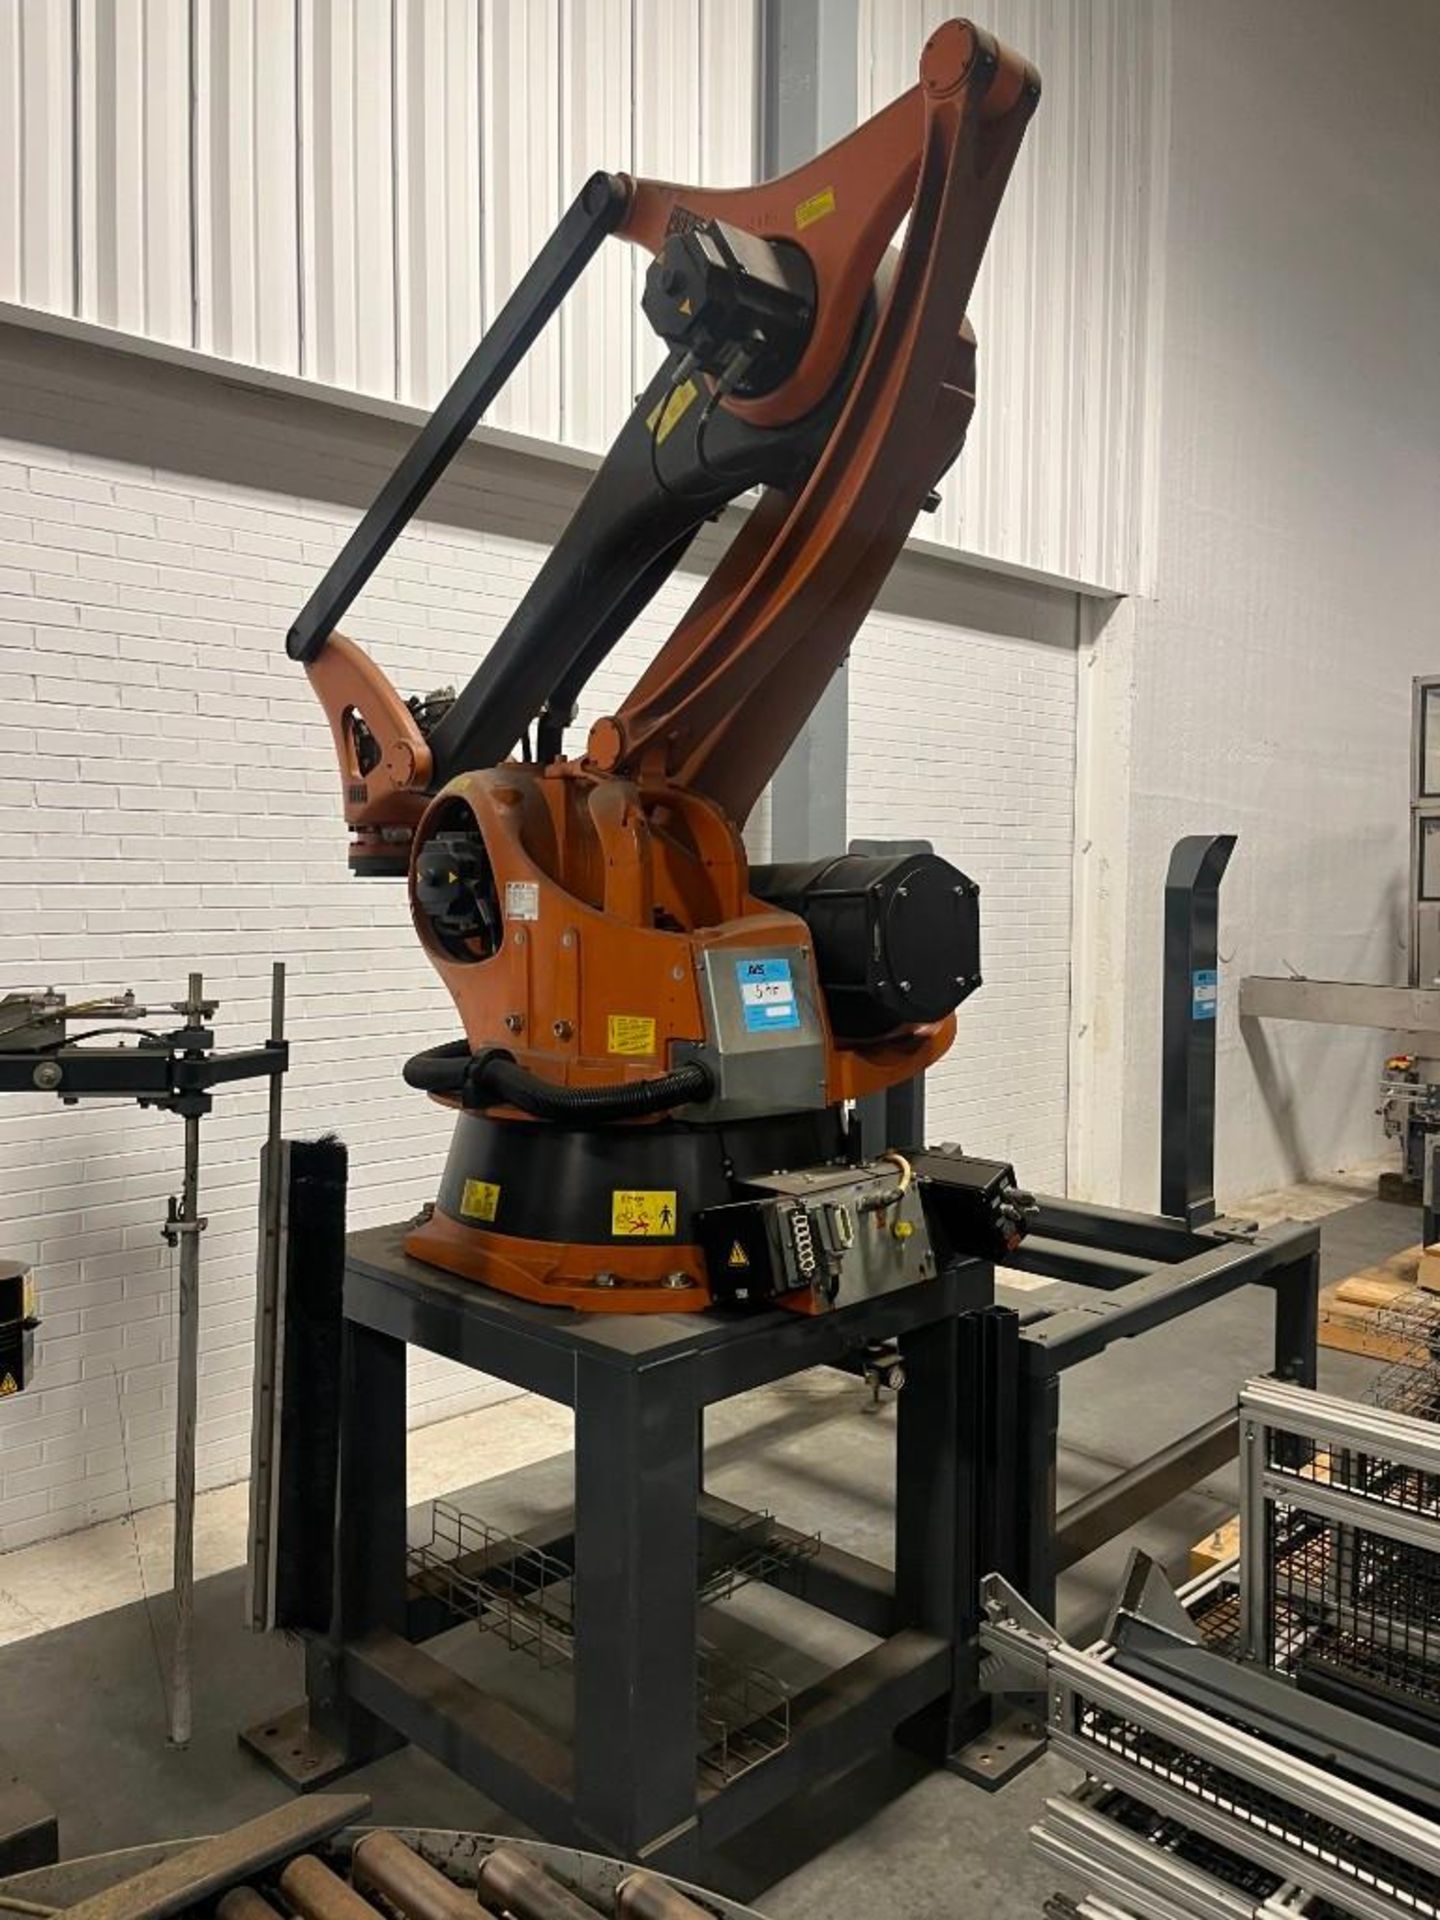 Wulftec/Kuka Robotic Palletizing System, Model ECOPAL. Includes (1) Wulftec automatic stretch wrappe - Image 32 of 75